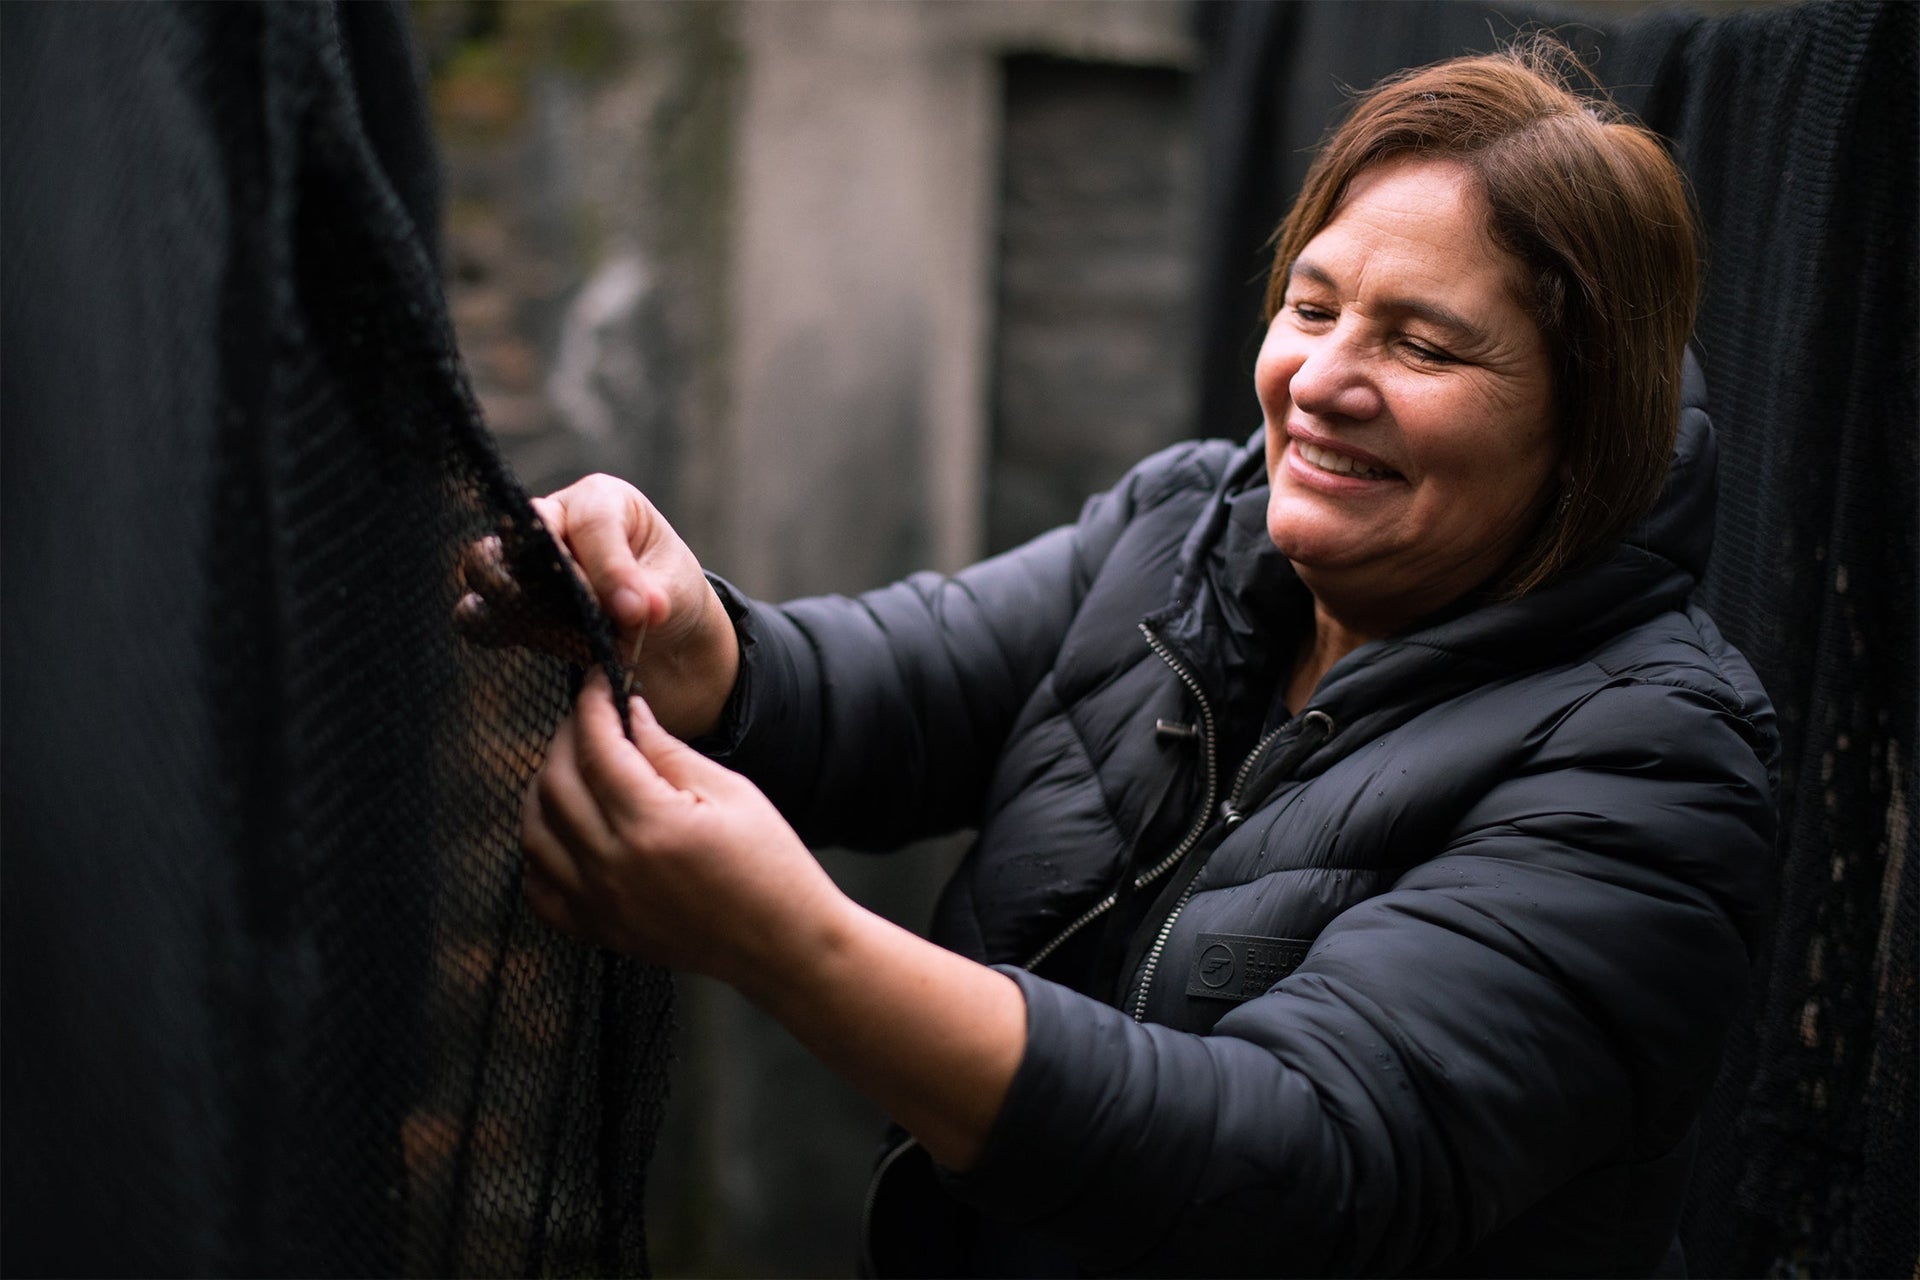 Jacqueline inspects nylon nets with a smile during the drying process at Bureo's warehouse in Talcahuano, Chile.